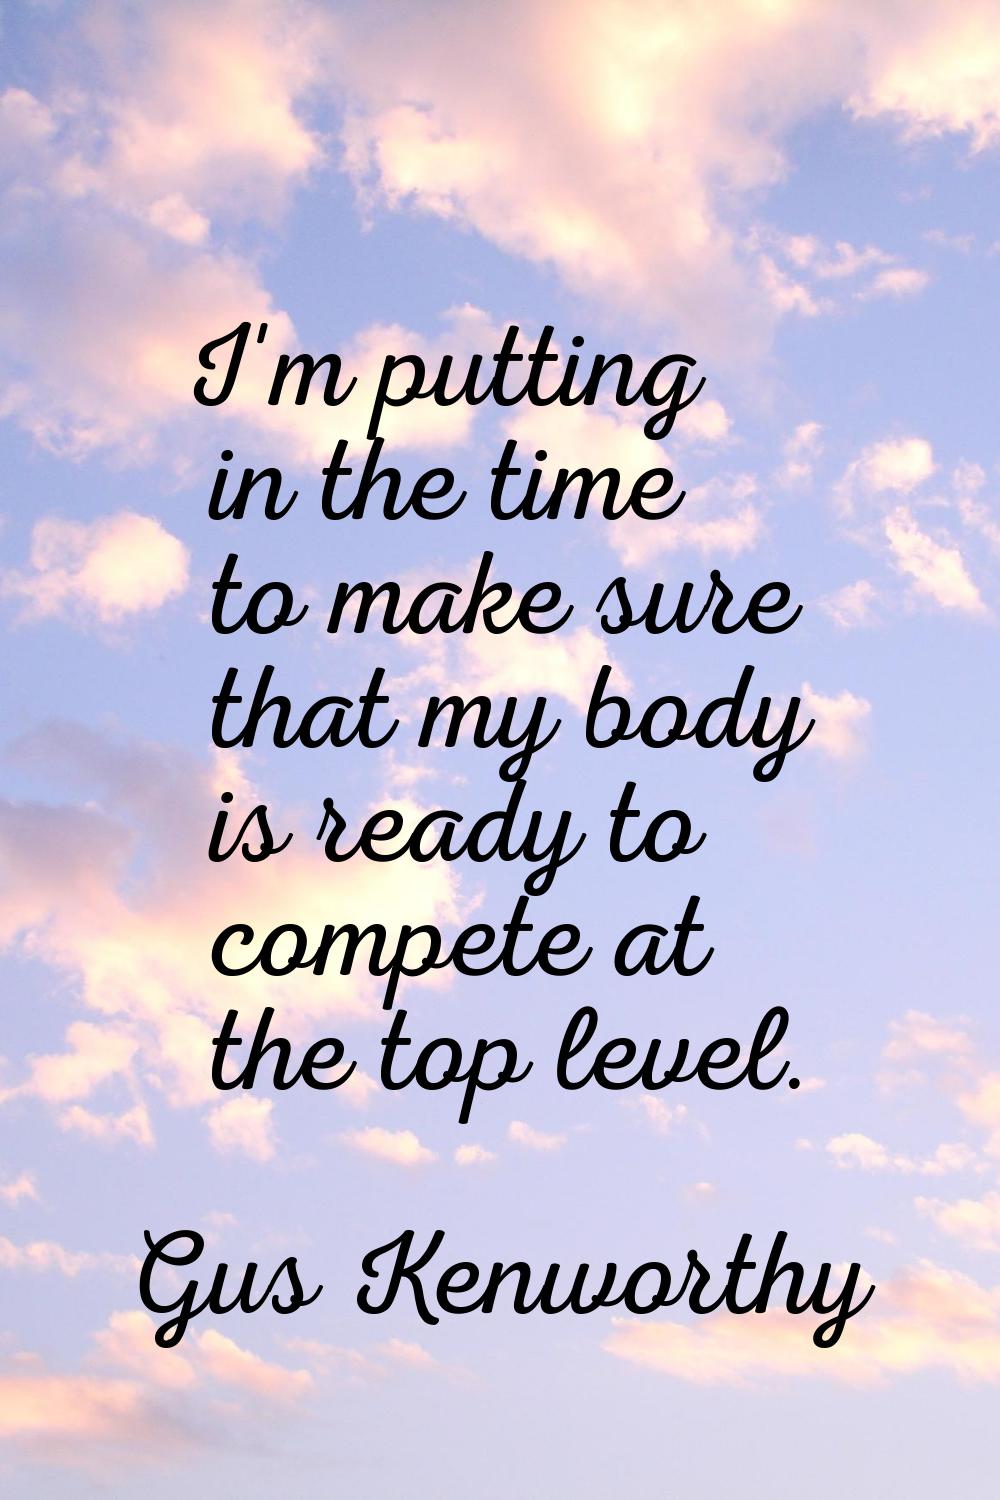 I'm putting in the time to make sure that my body is ready to compete at the top level.